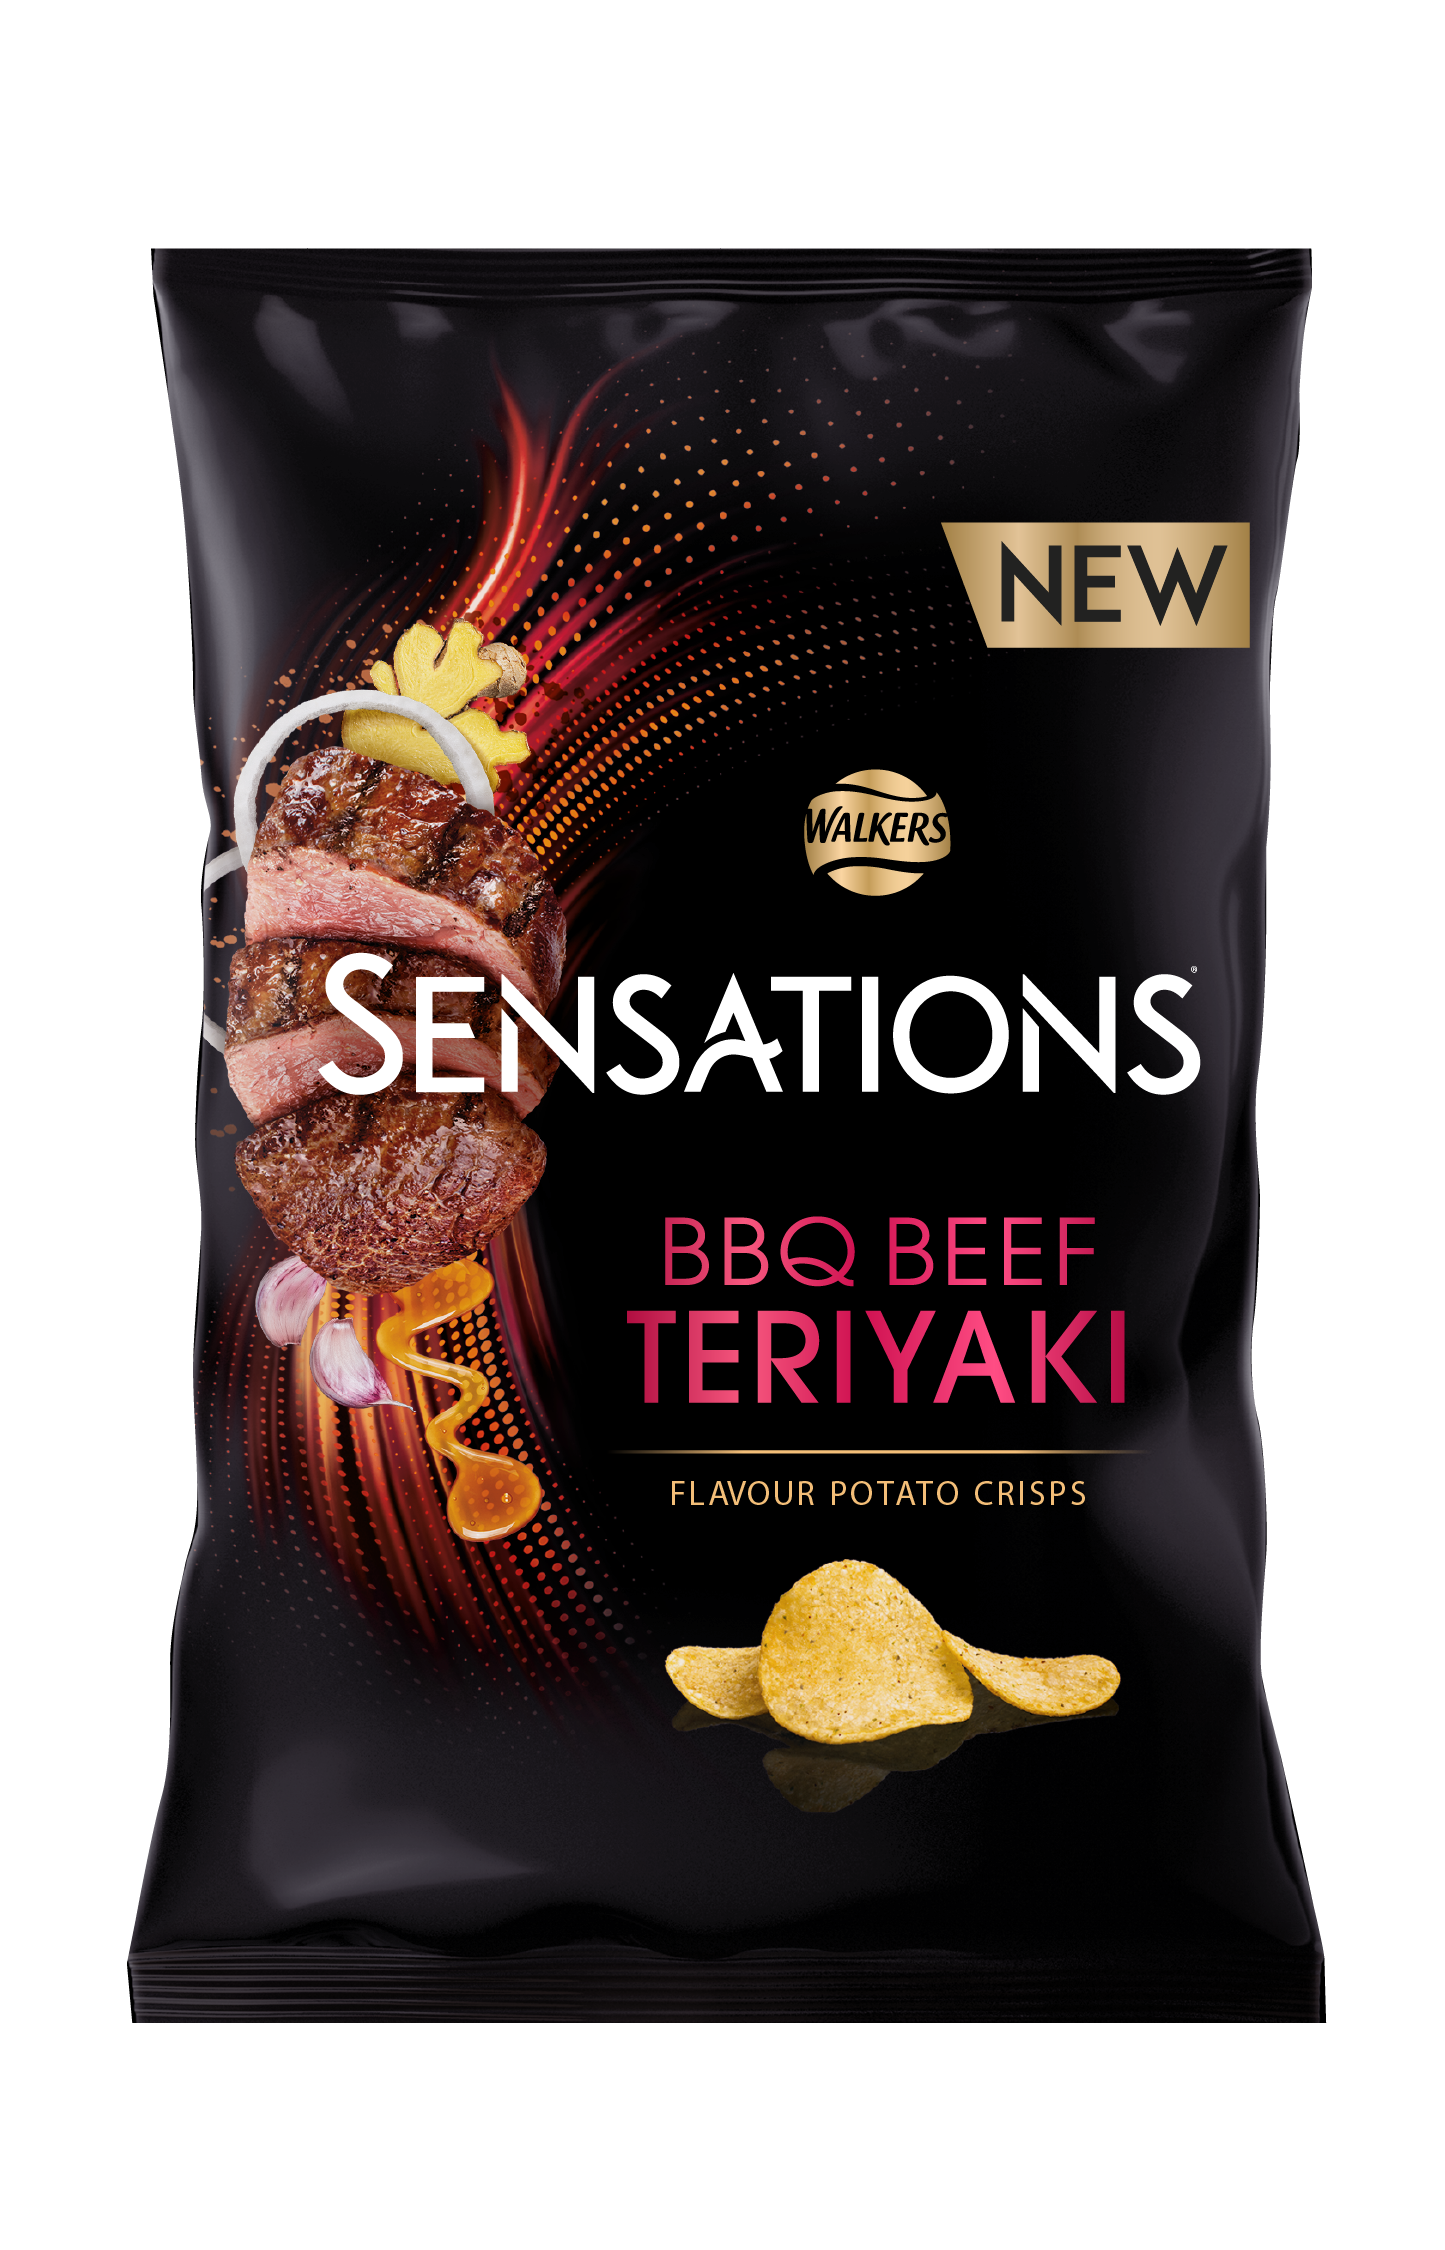 Walkers spices up range with BBQ Beef Teriyaki